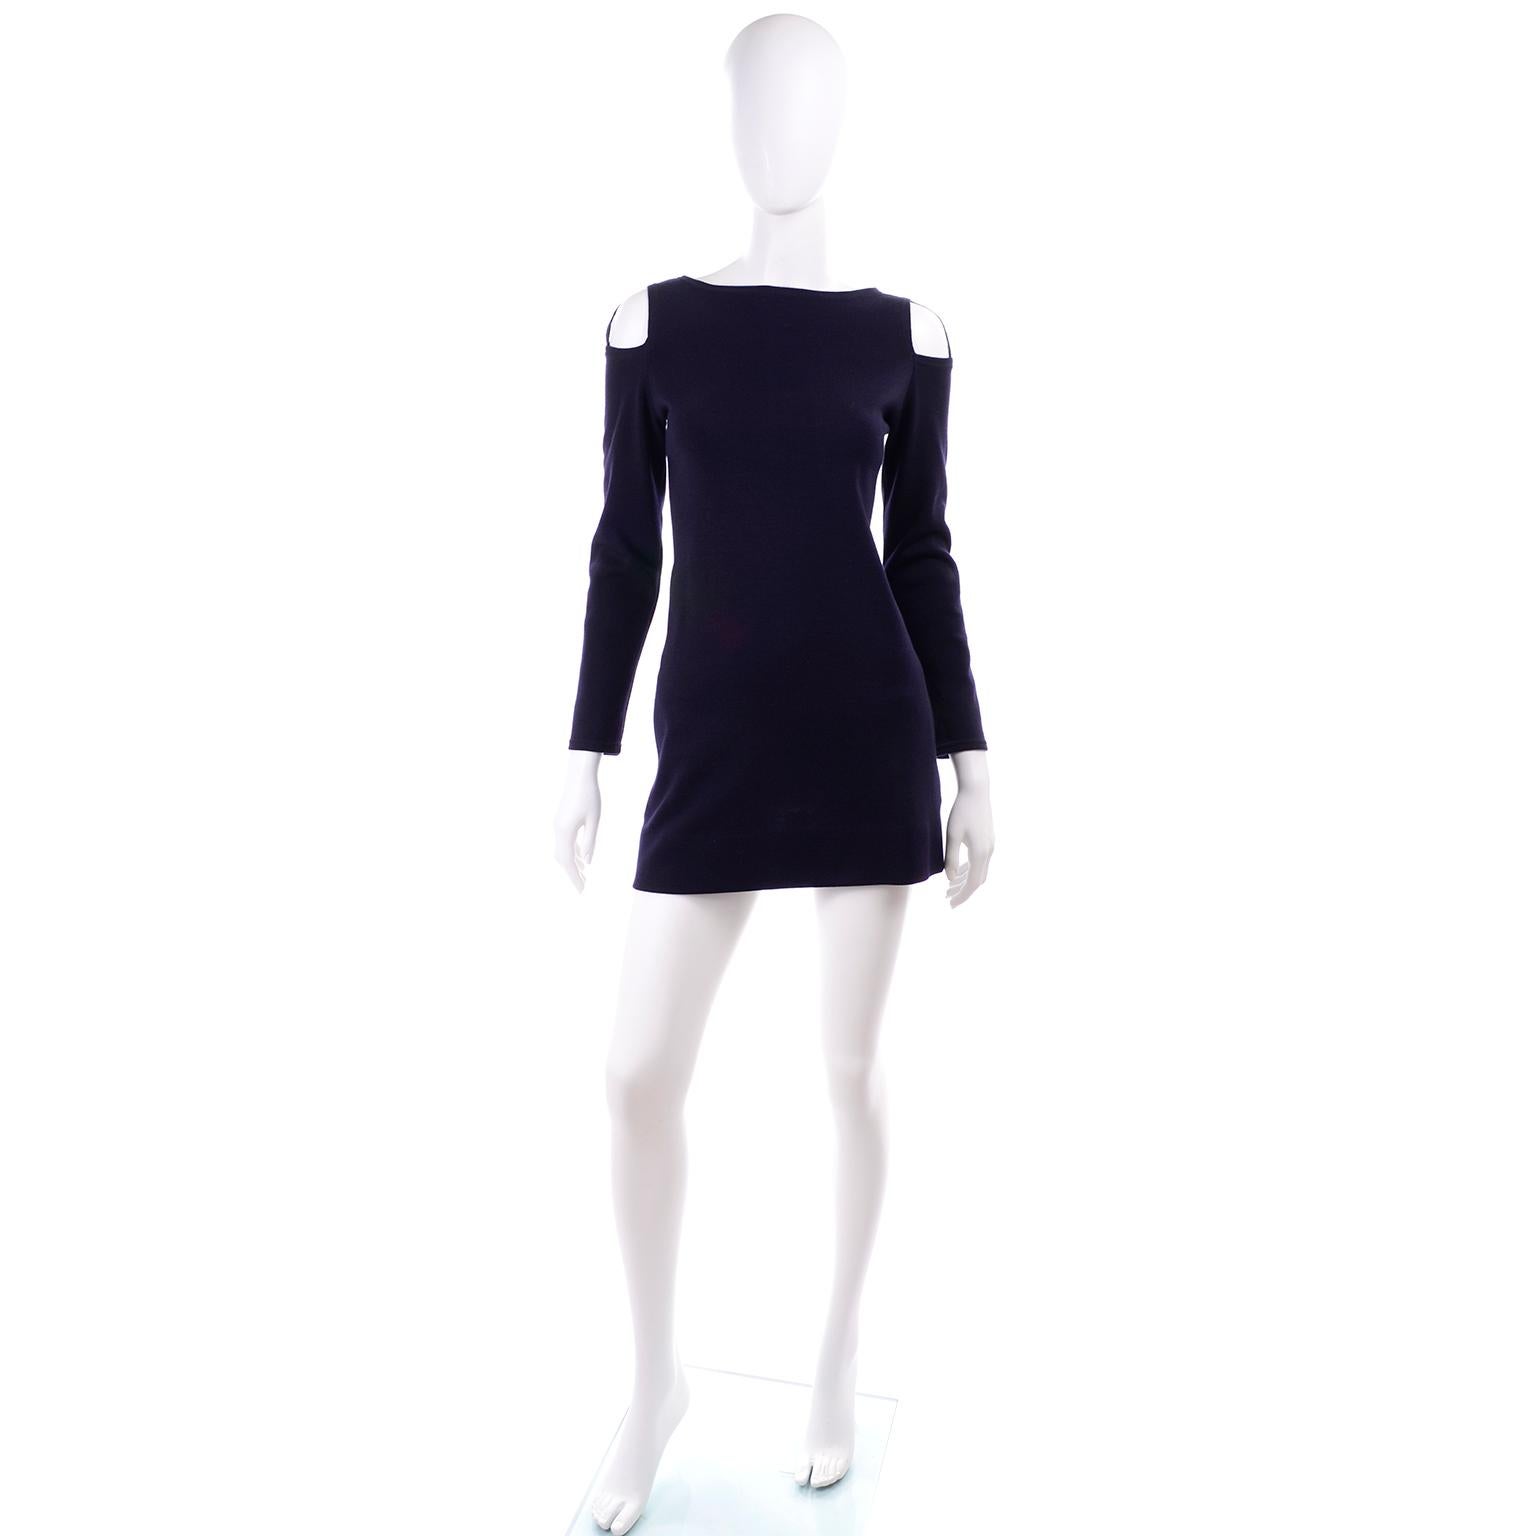 This is a fabulous vintage mini dress designed by Rudi Gernreich in the 1960's. This navy blue wool Harmon Knitwear dress has cutouts at the shoulders, side slit pockets, and closes with a back zipper and a hook and eye. Rudi Gernreich became famous